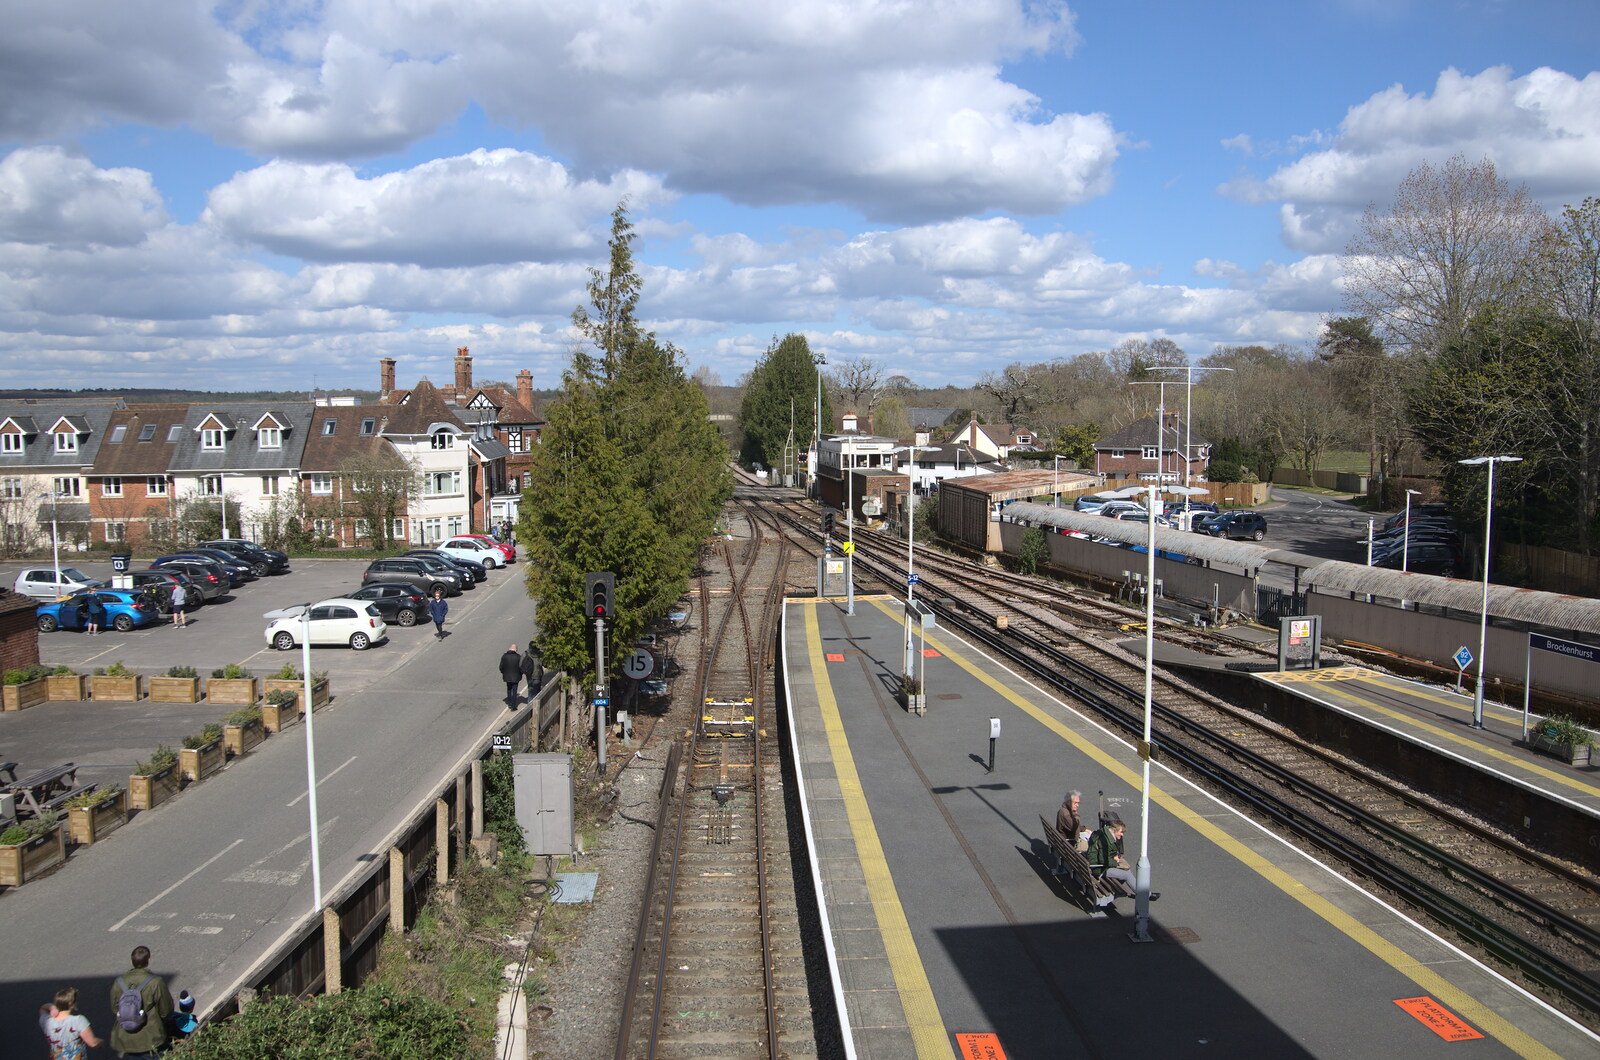 A Trip Down South, New Milton, Hampshire - 9th April 2022: A view of the tracks at Brockenhurst